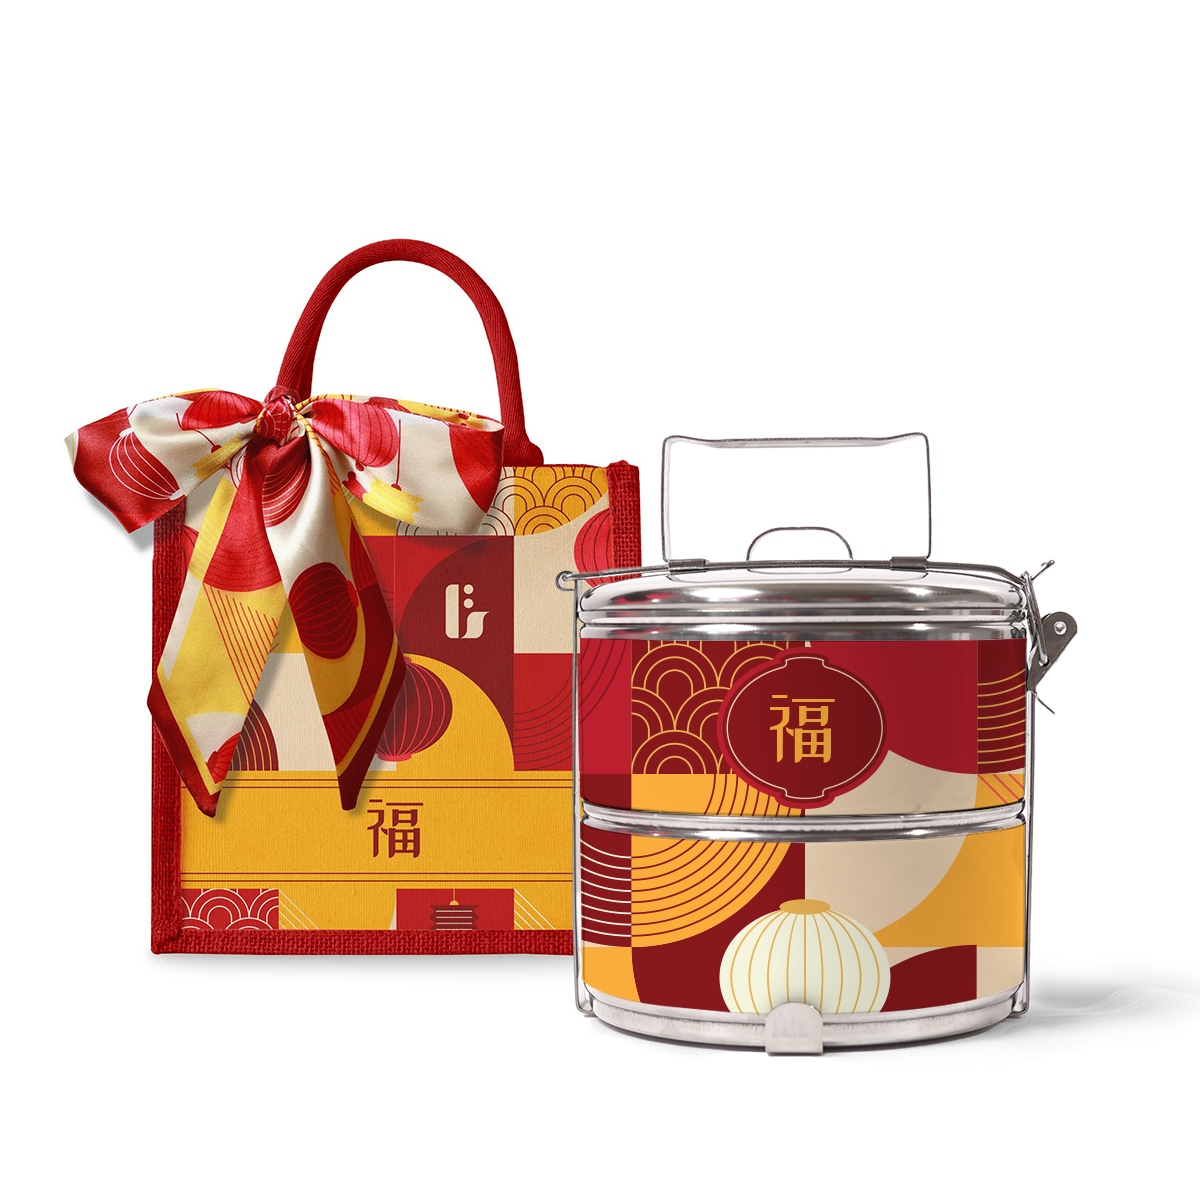 Lunar Blessing (Red Design) - Lunch Tote Bag with Two-Tier Tiffin Carrier